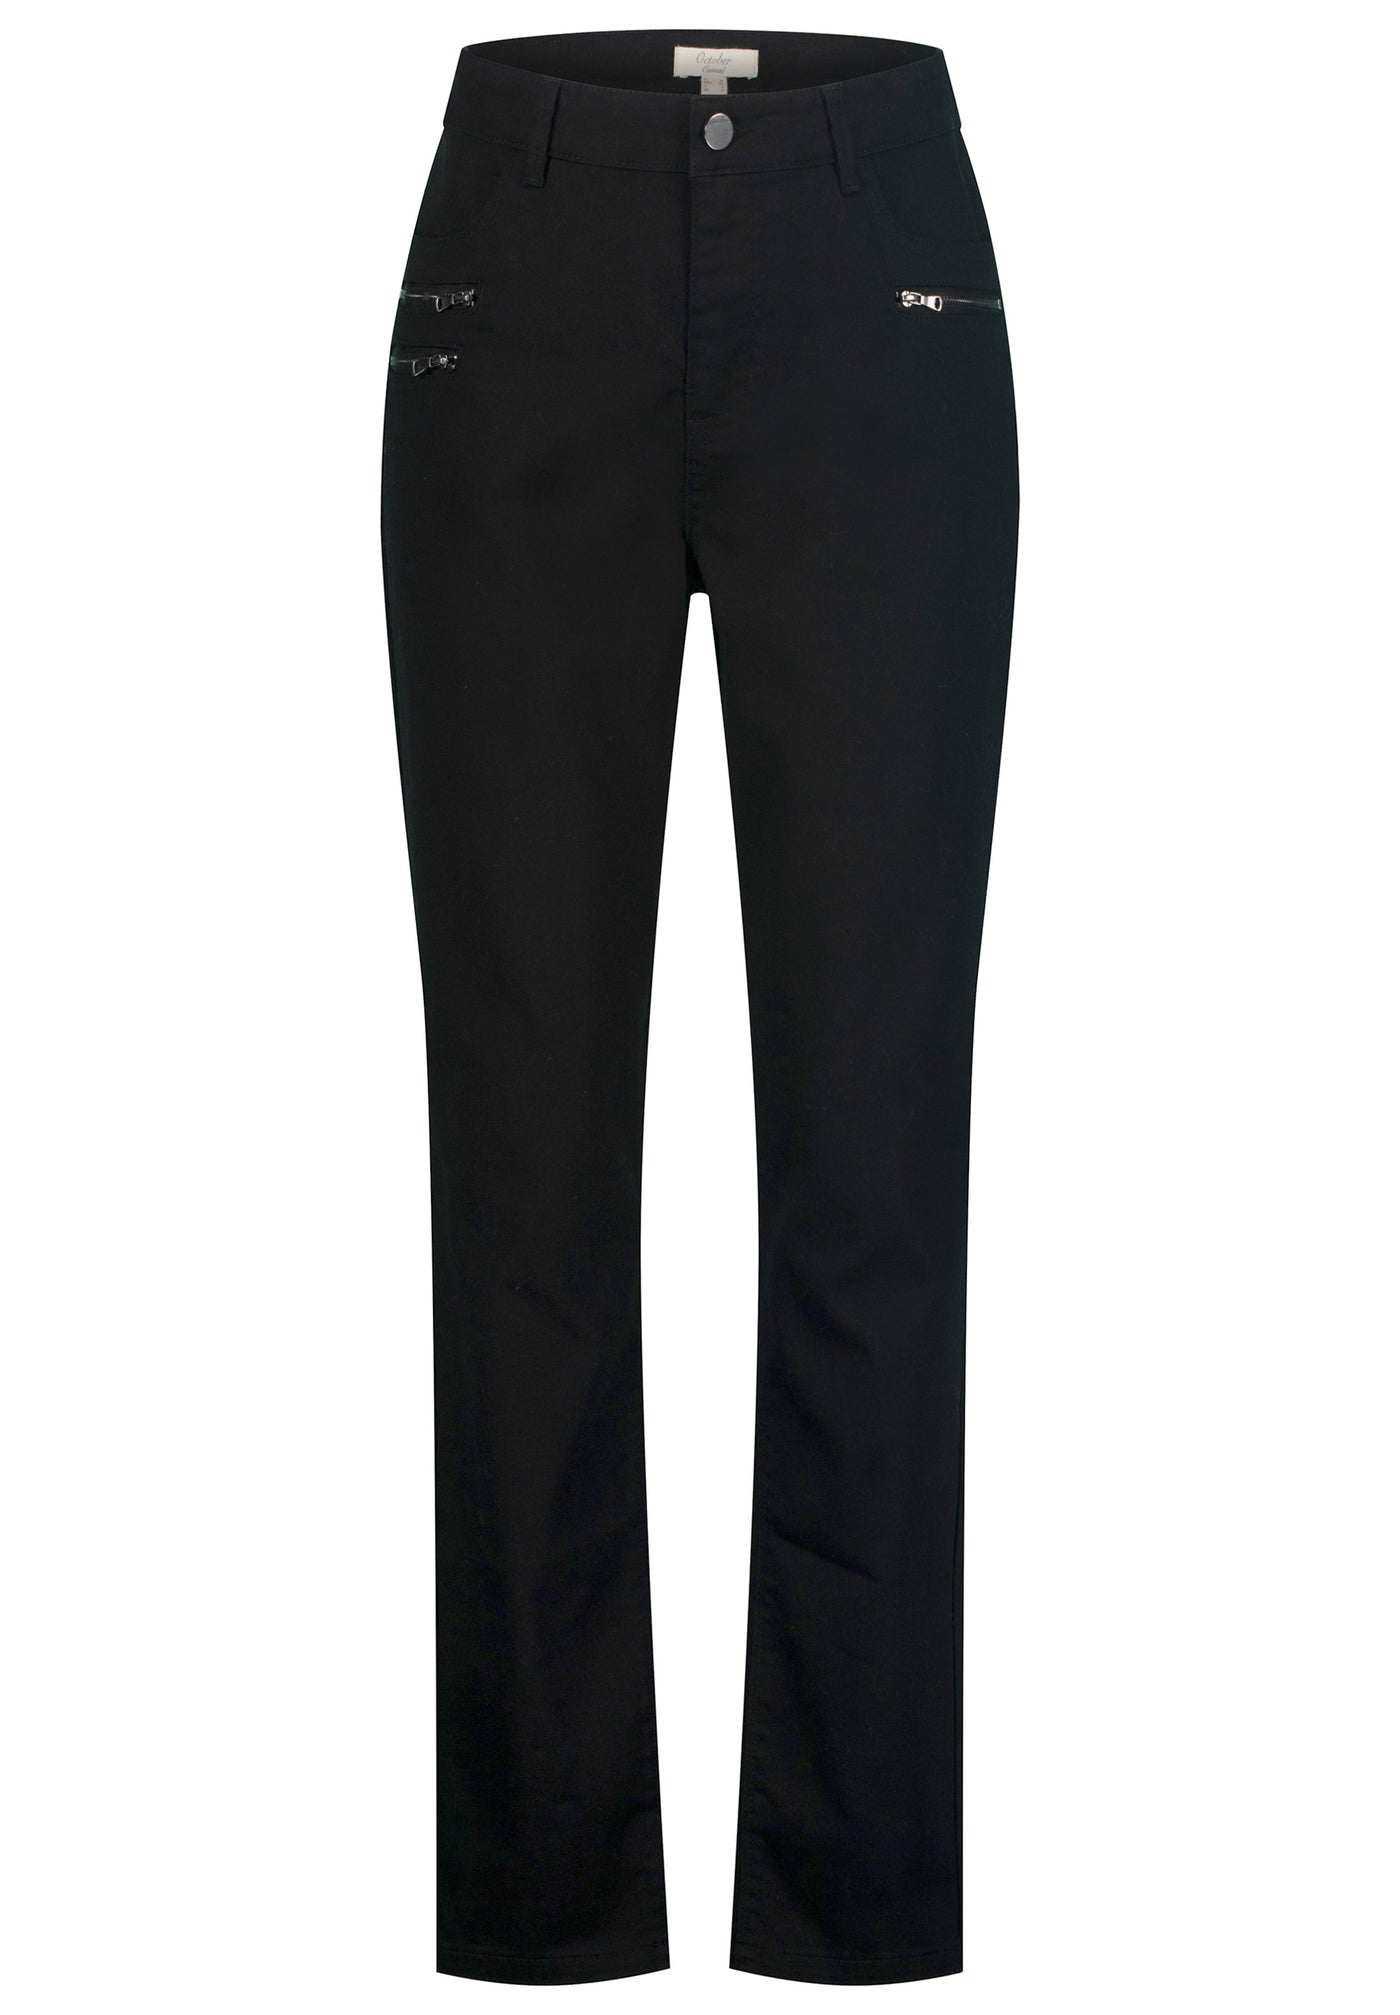 PANTS WITH 5 POCKETS WITH DECORATIVE ZIPPERS BLACK